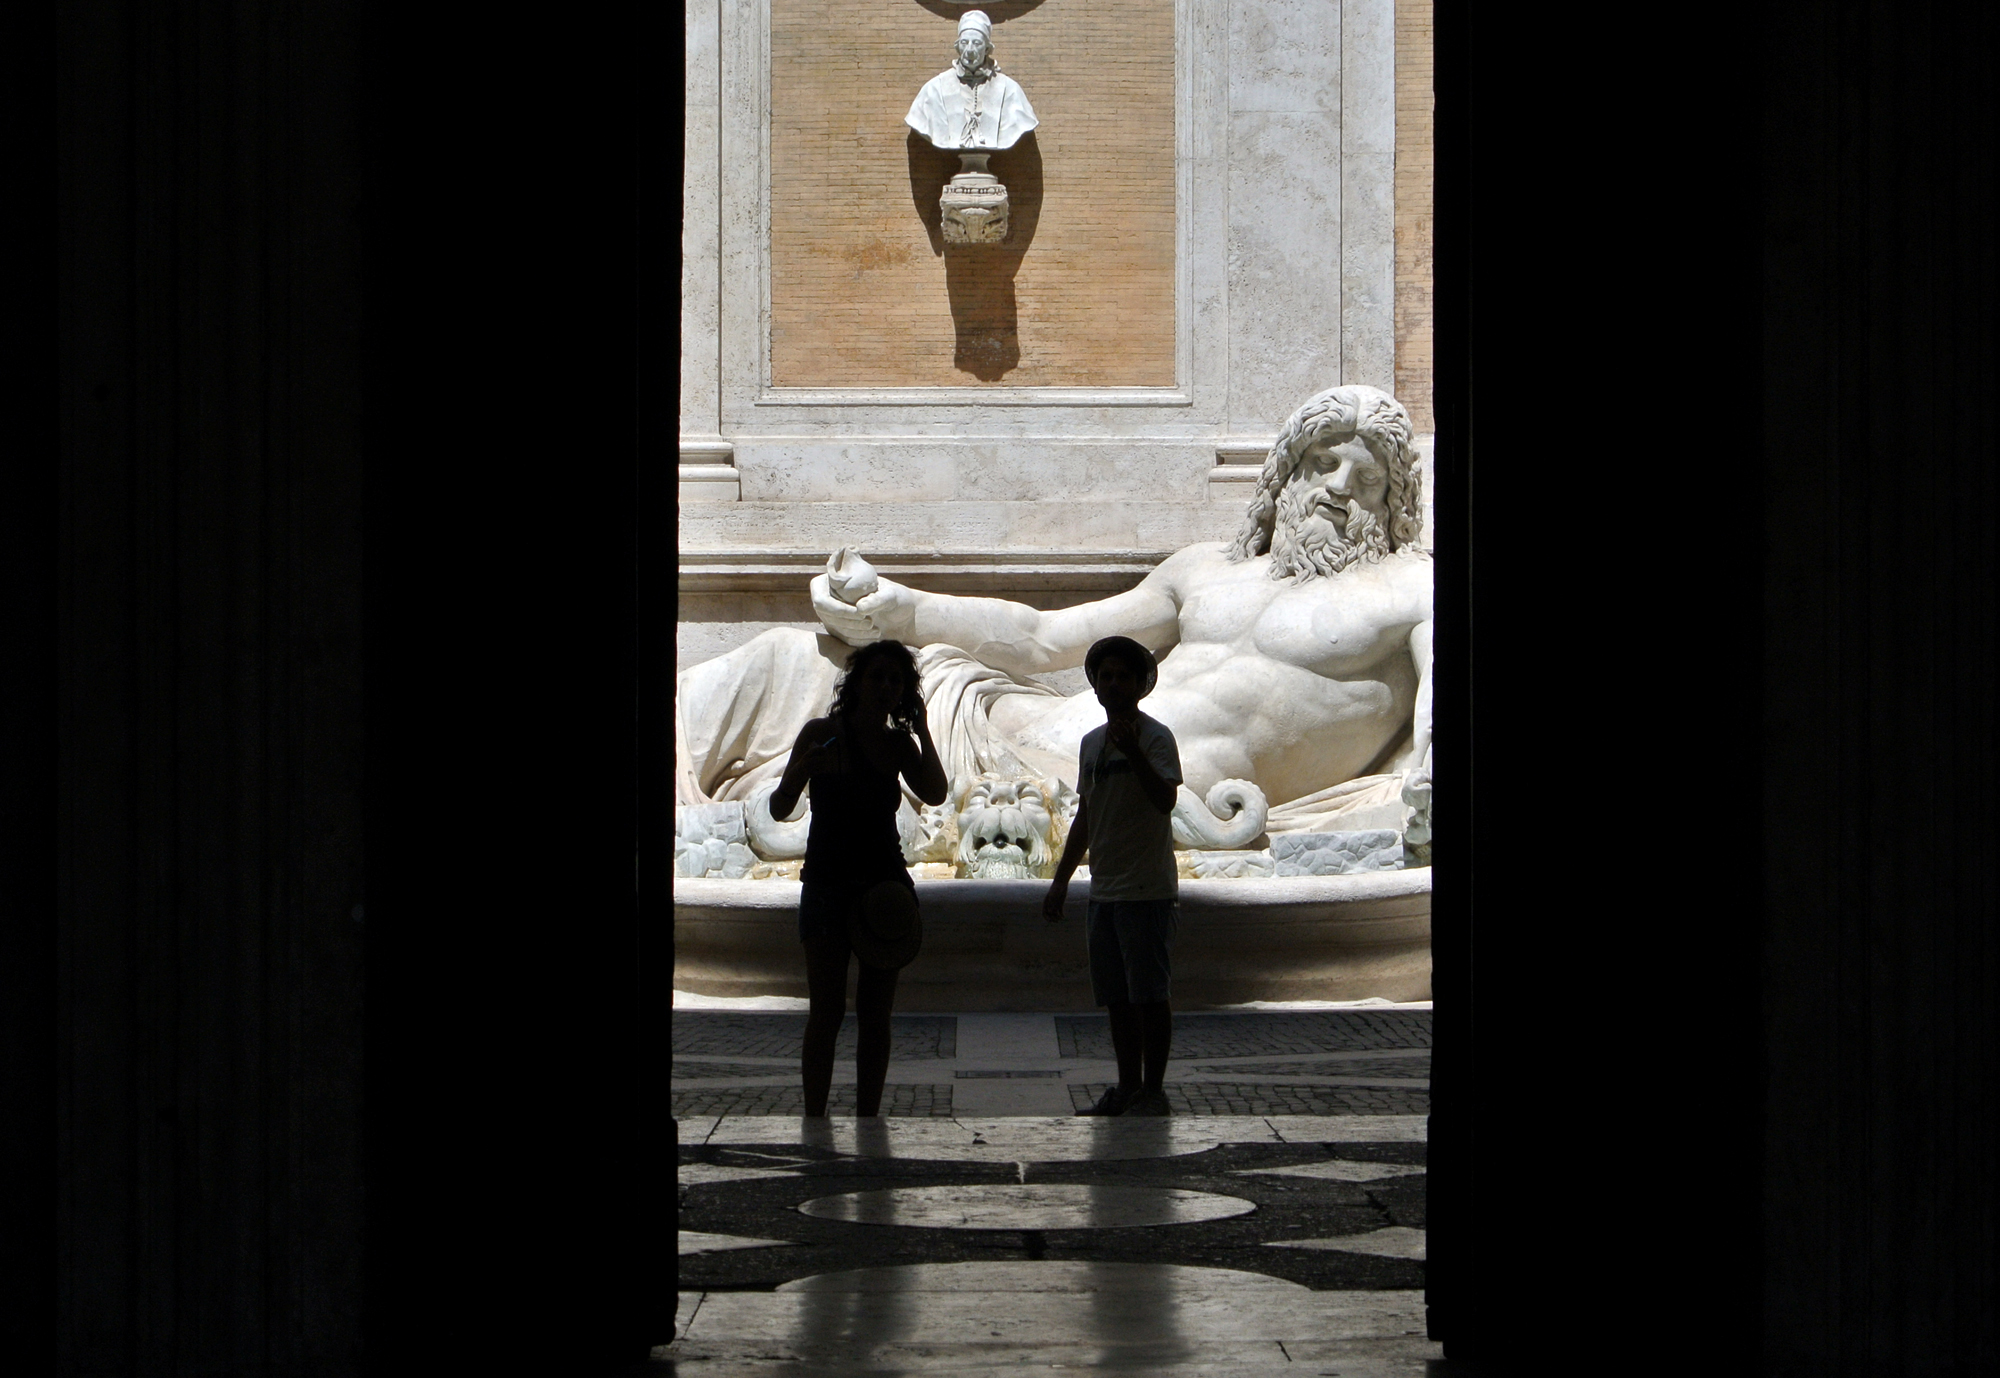 Tourists admire the  statue of  Marforio river at the Capitoline museums in Rome, Saturday, July 27, 2013. On Saturday many Italian museums will stay open in the evening. (AP Photo/Gregorio Borgia)